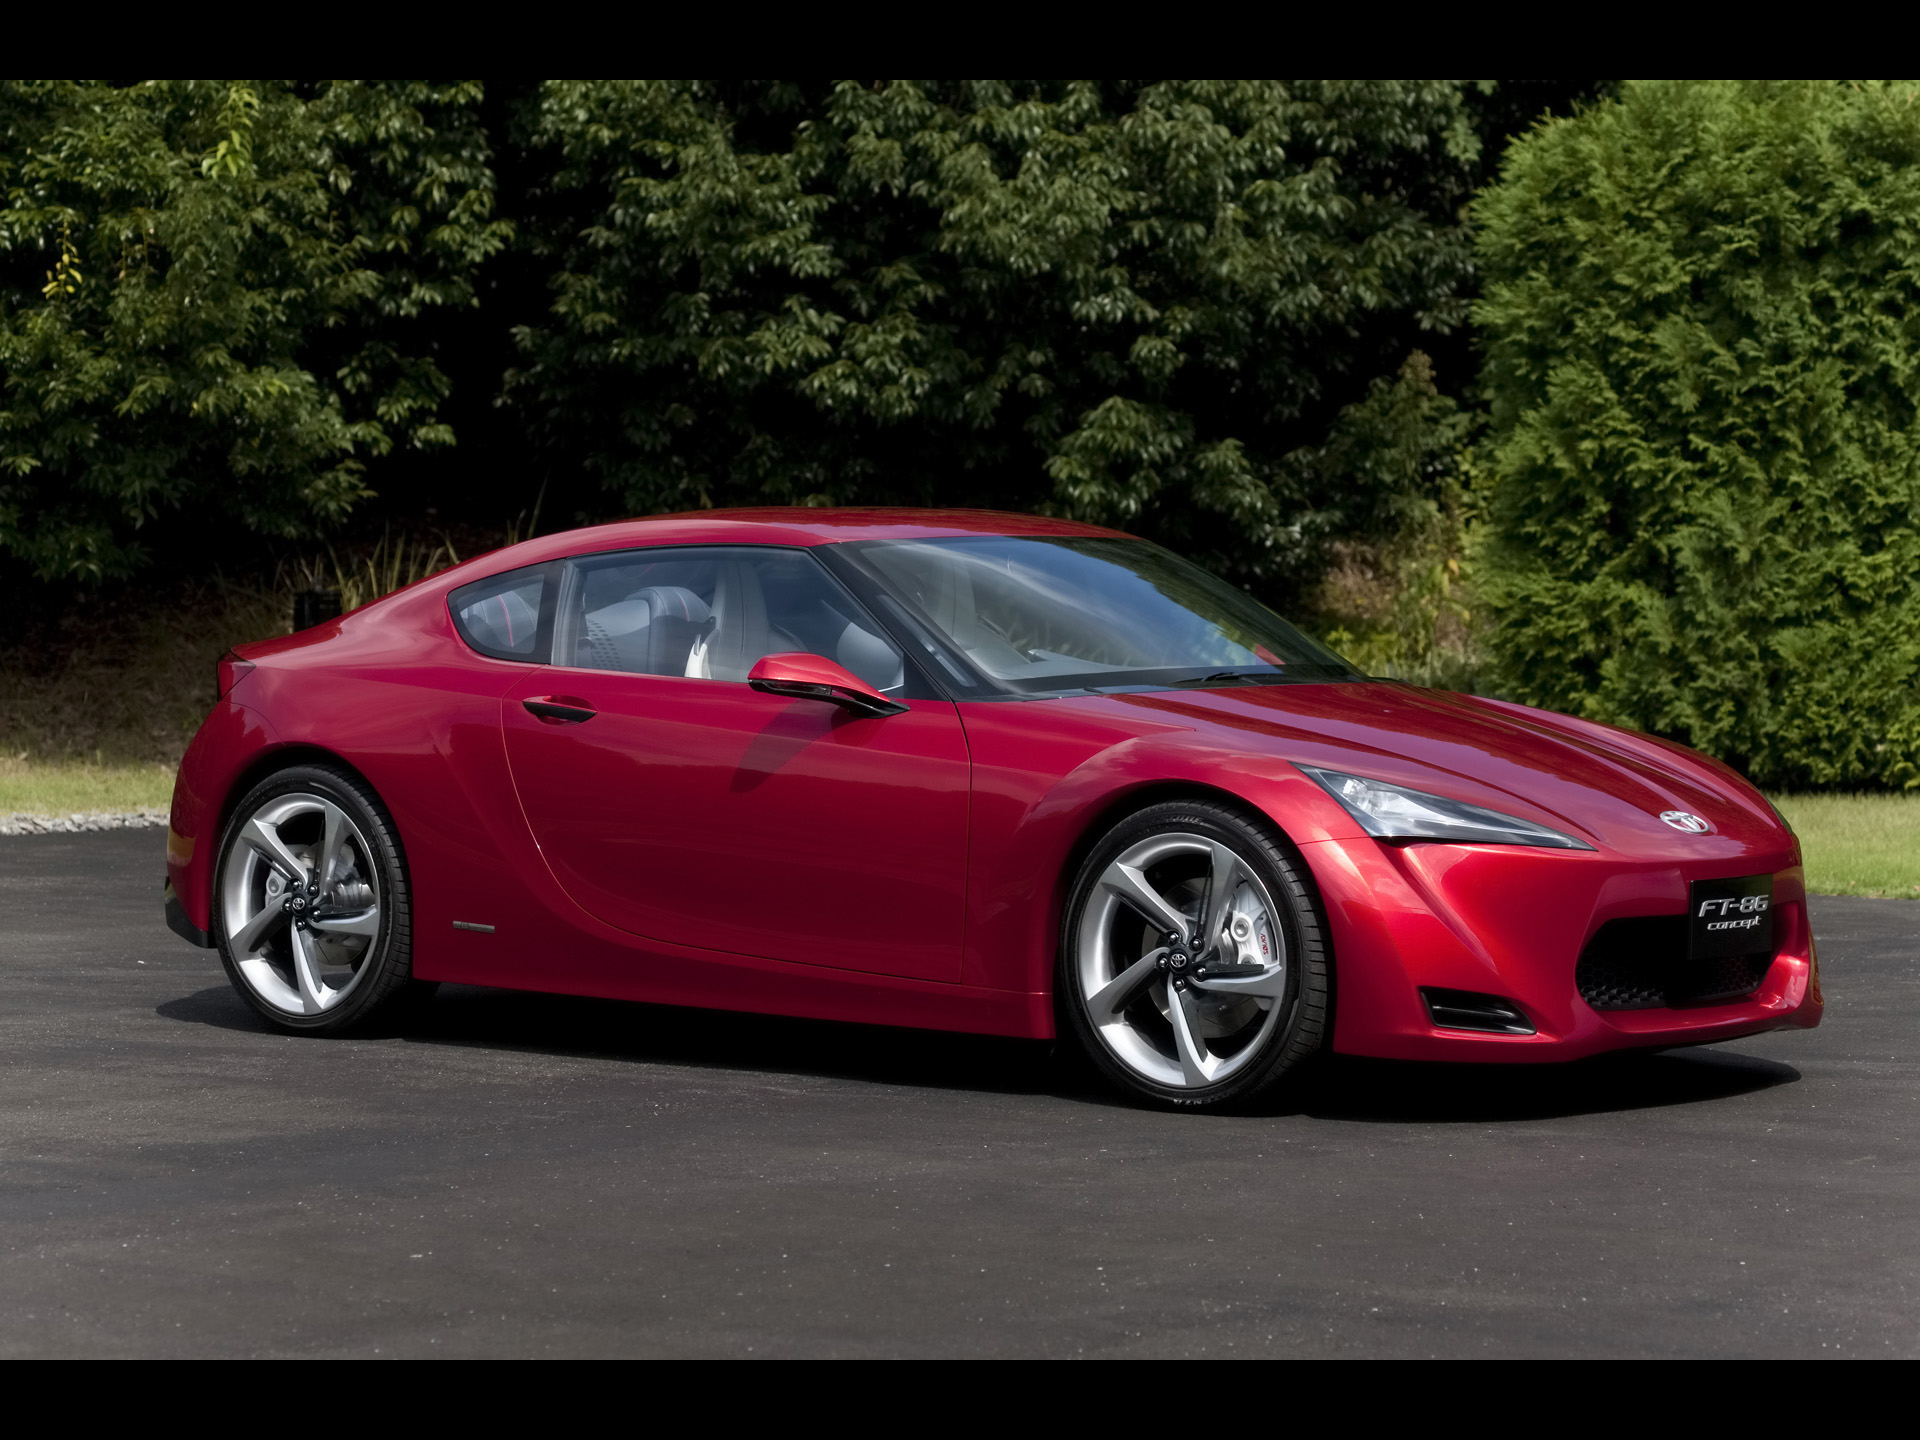 2009-Toyota-FT-86-Concept-Front-And-Side-1920x1440.jpg